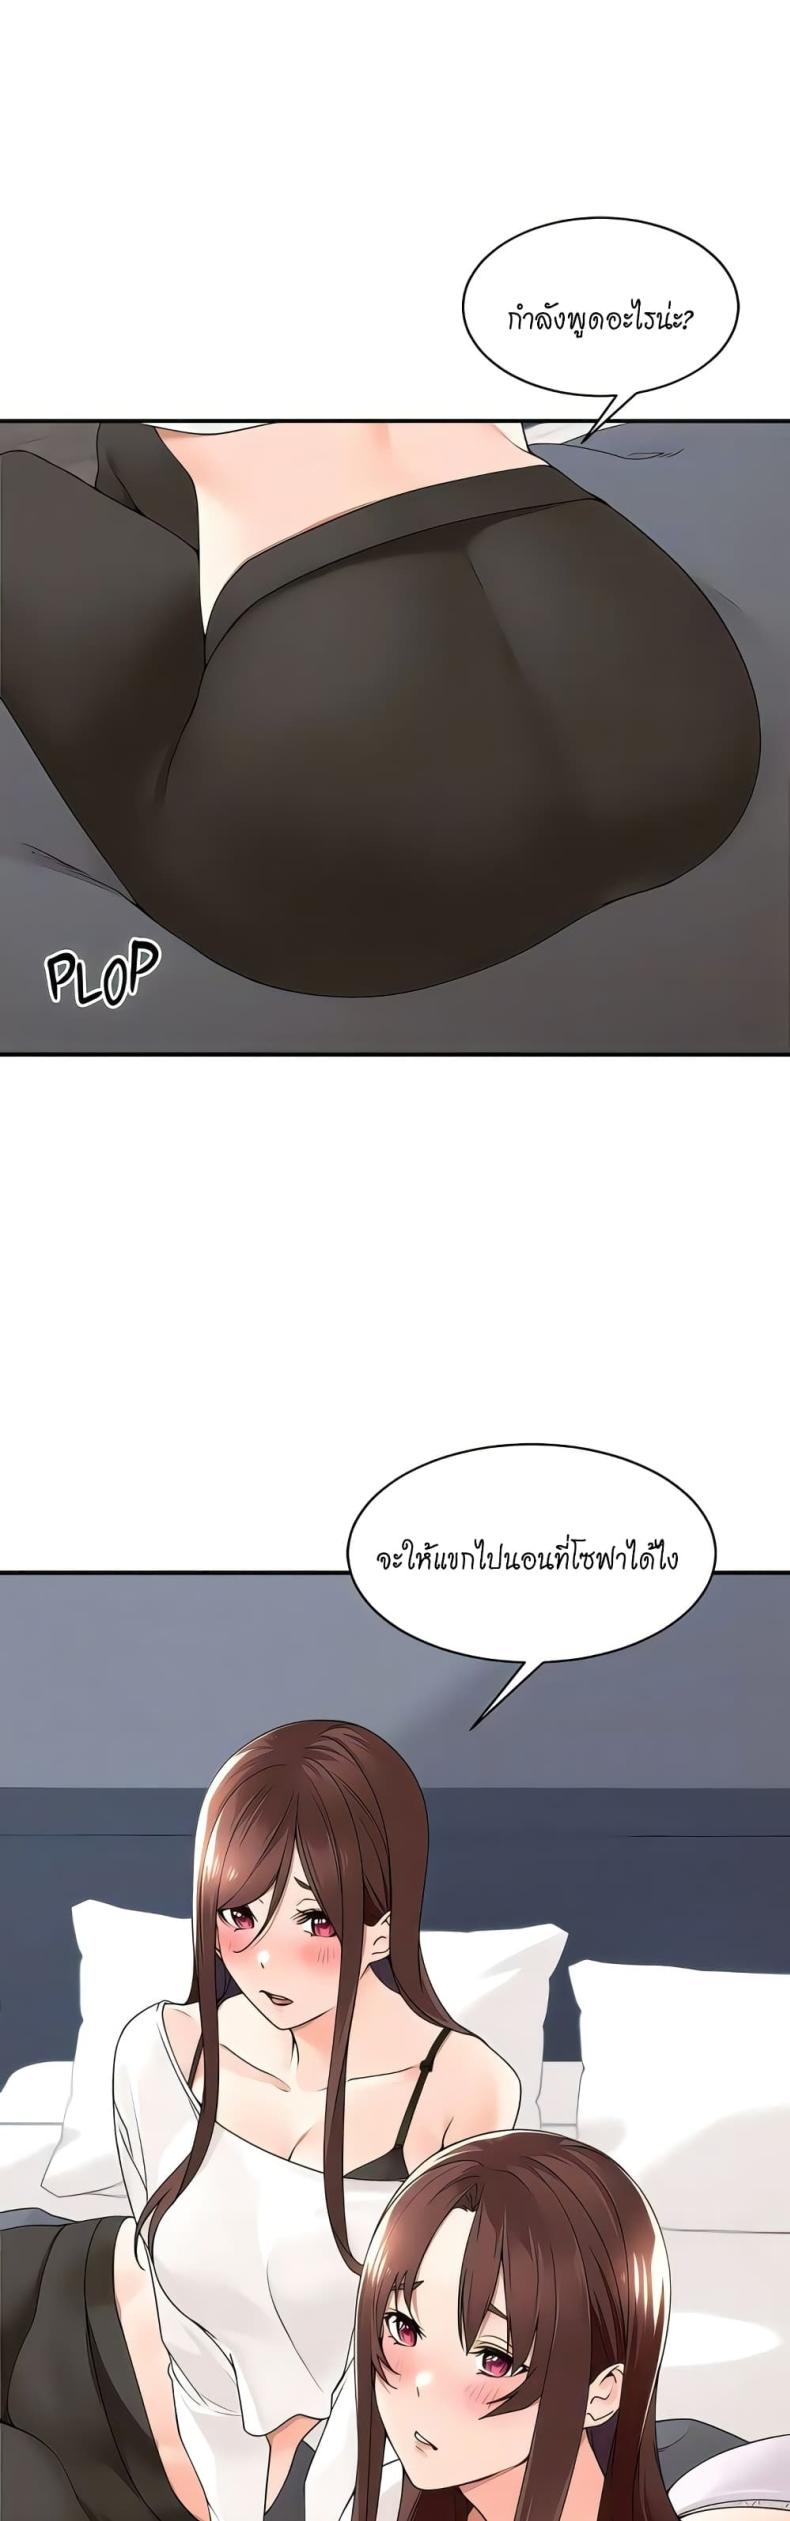 Manager, Please Scold Me 30 ภาพที่ 11